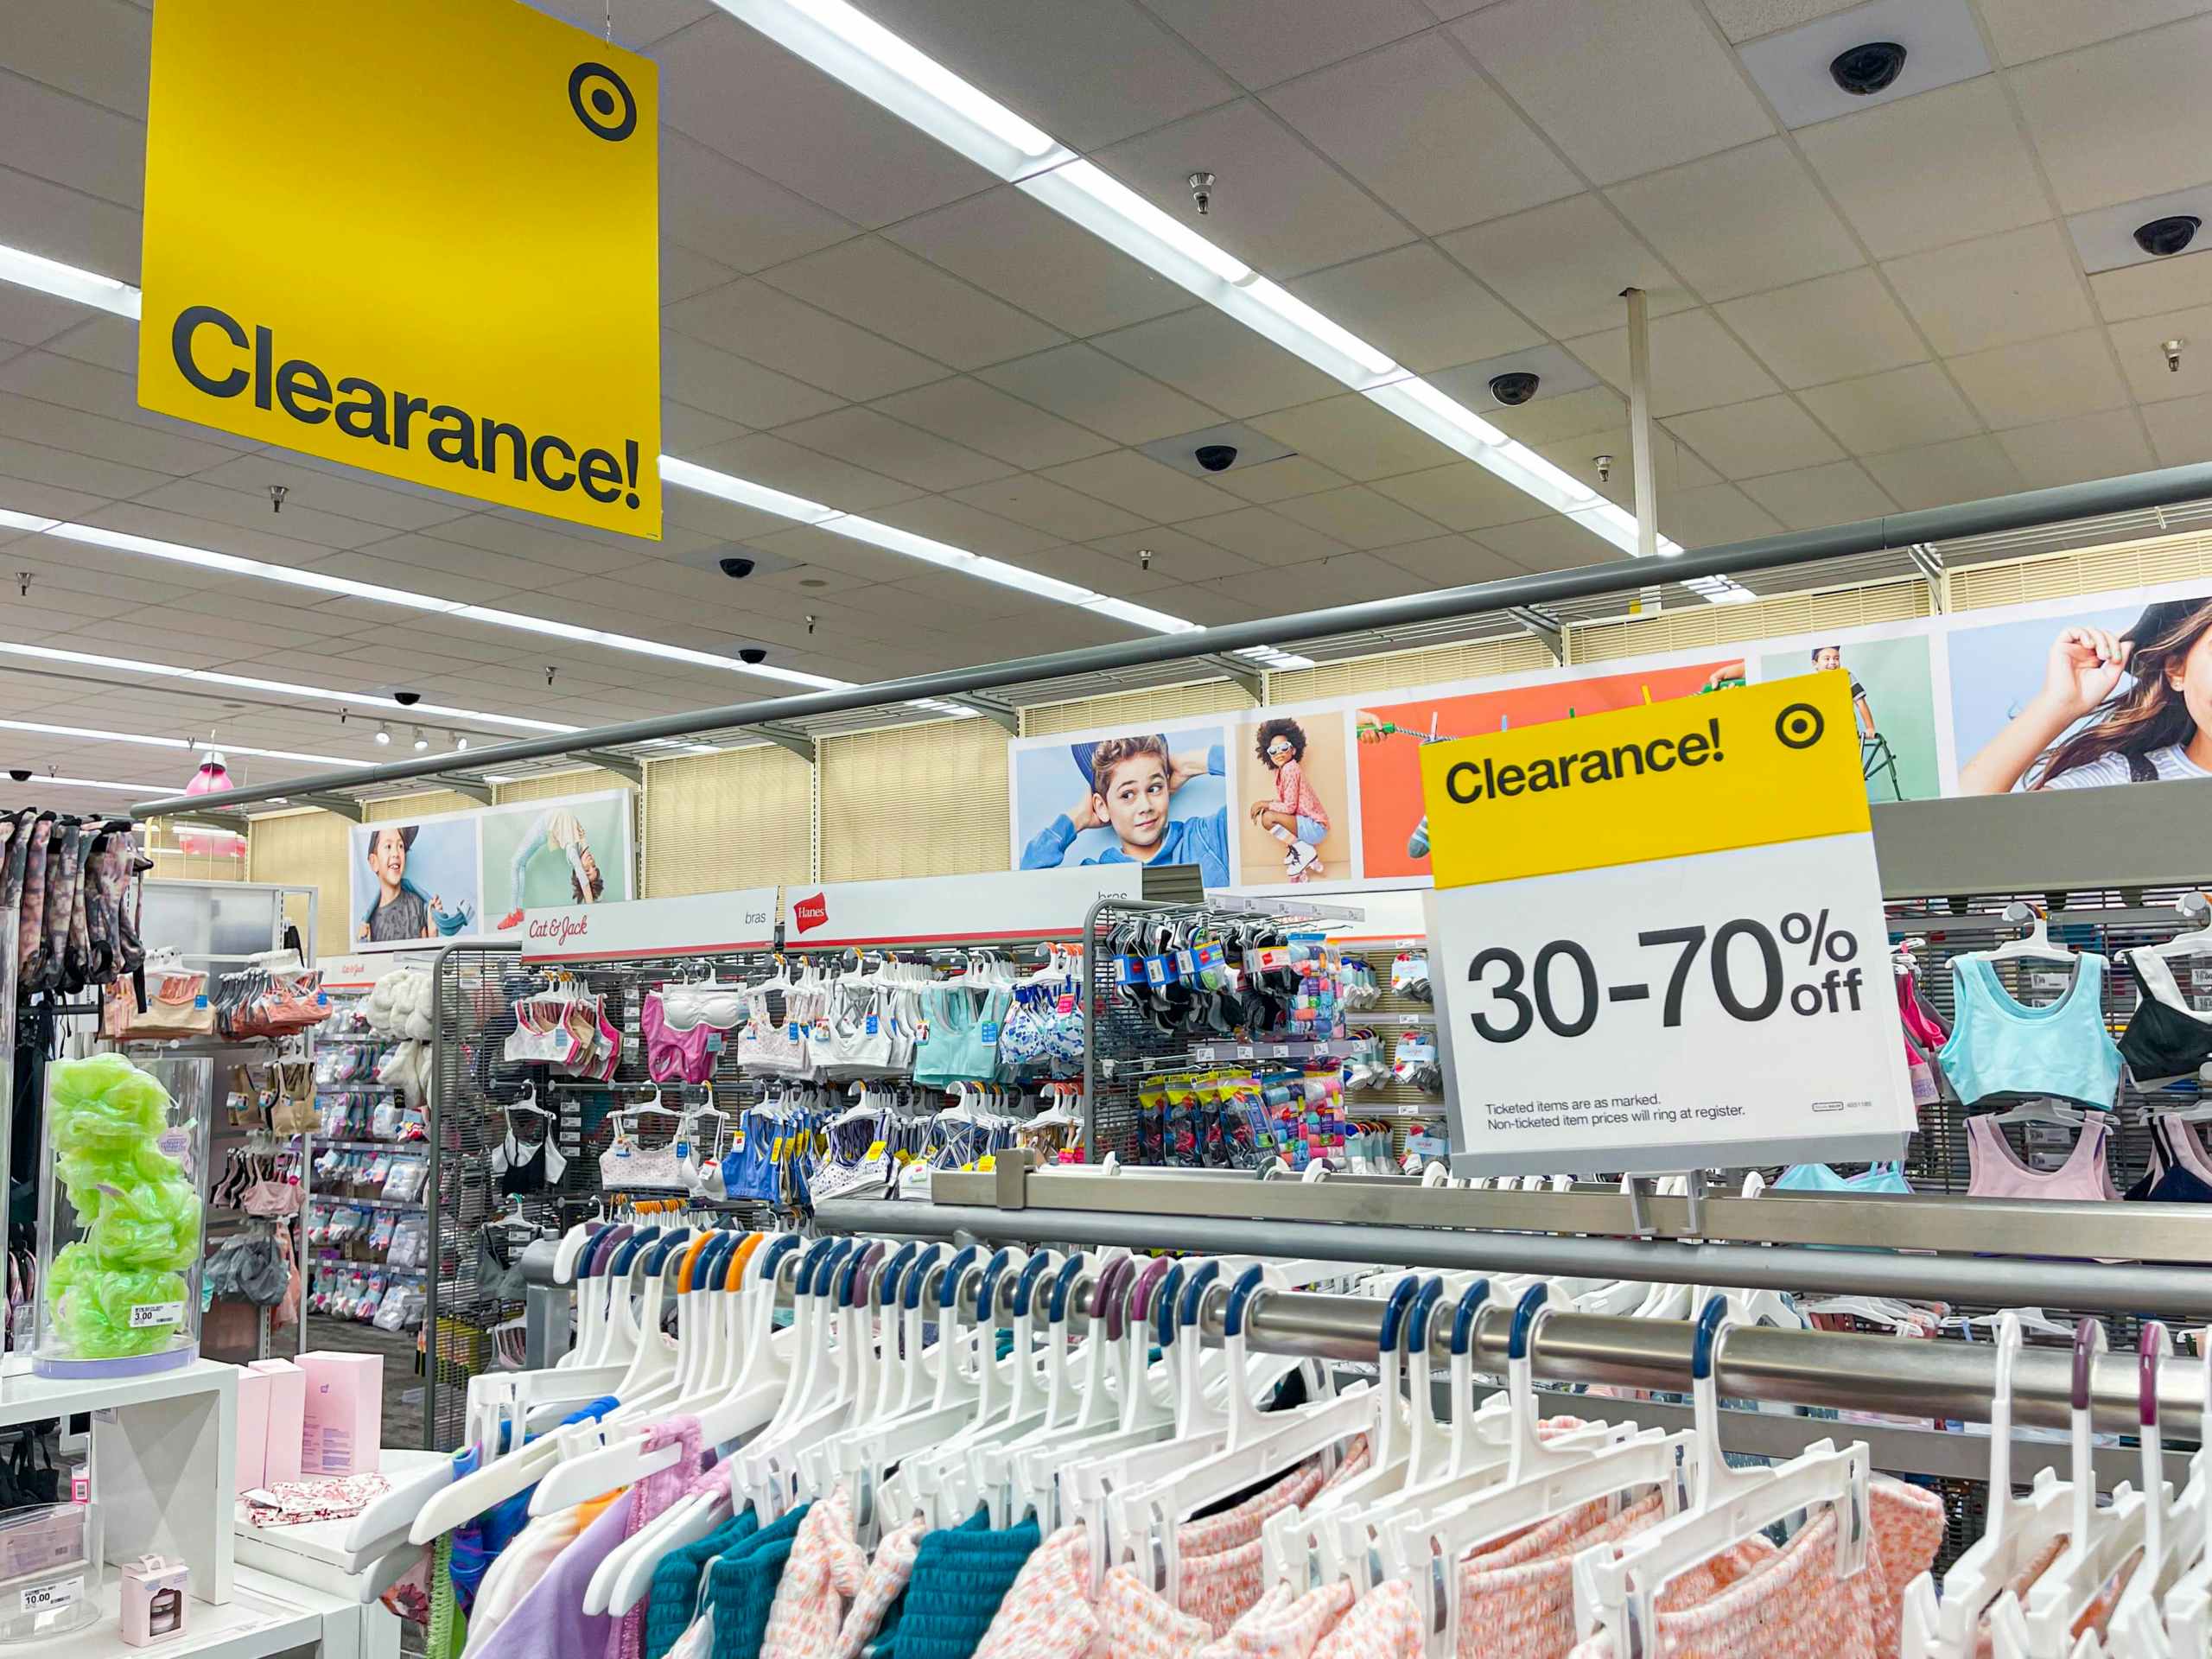 target-clearance-signs-2021-5